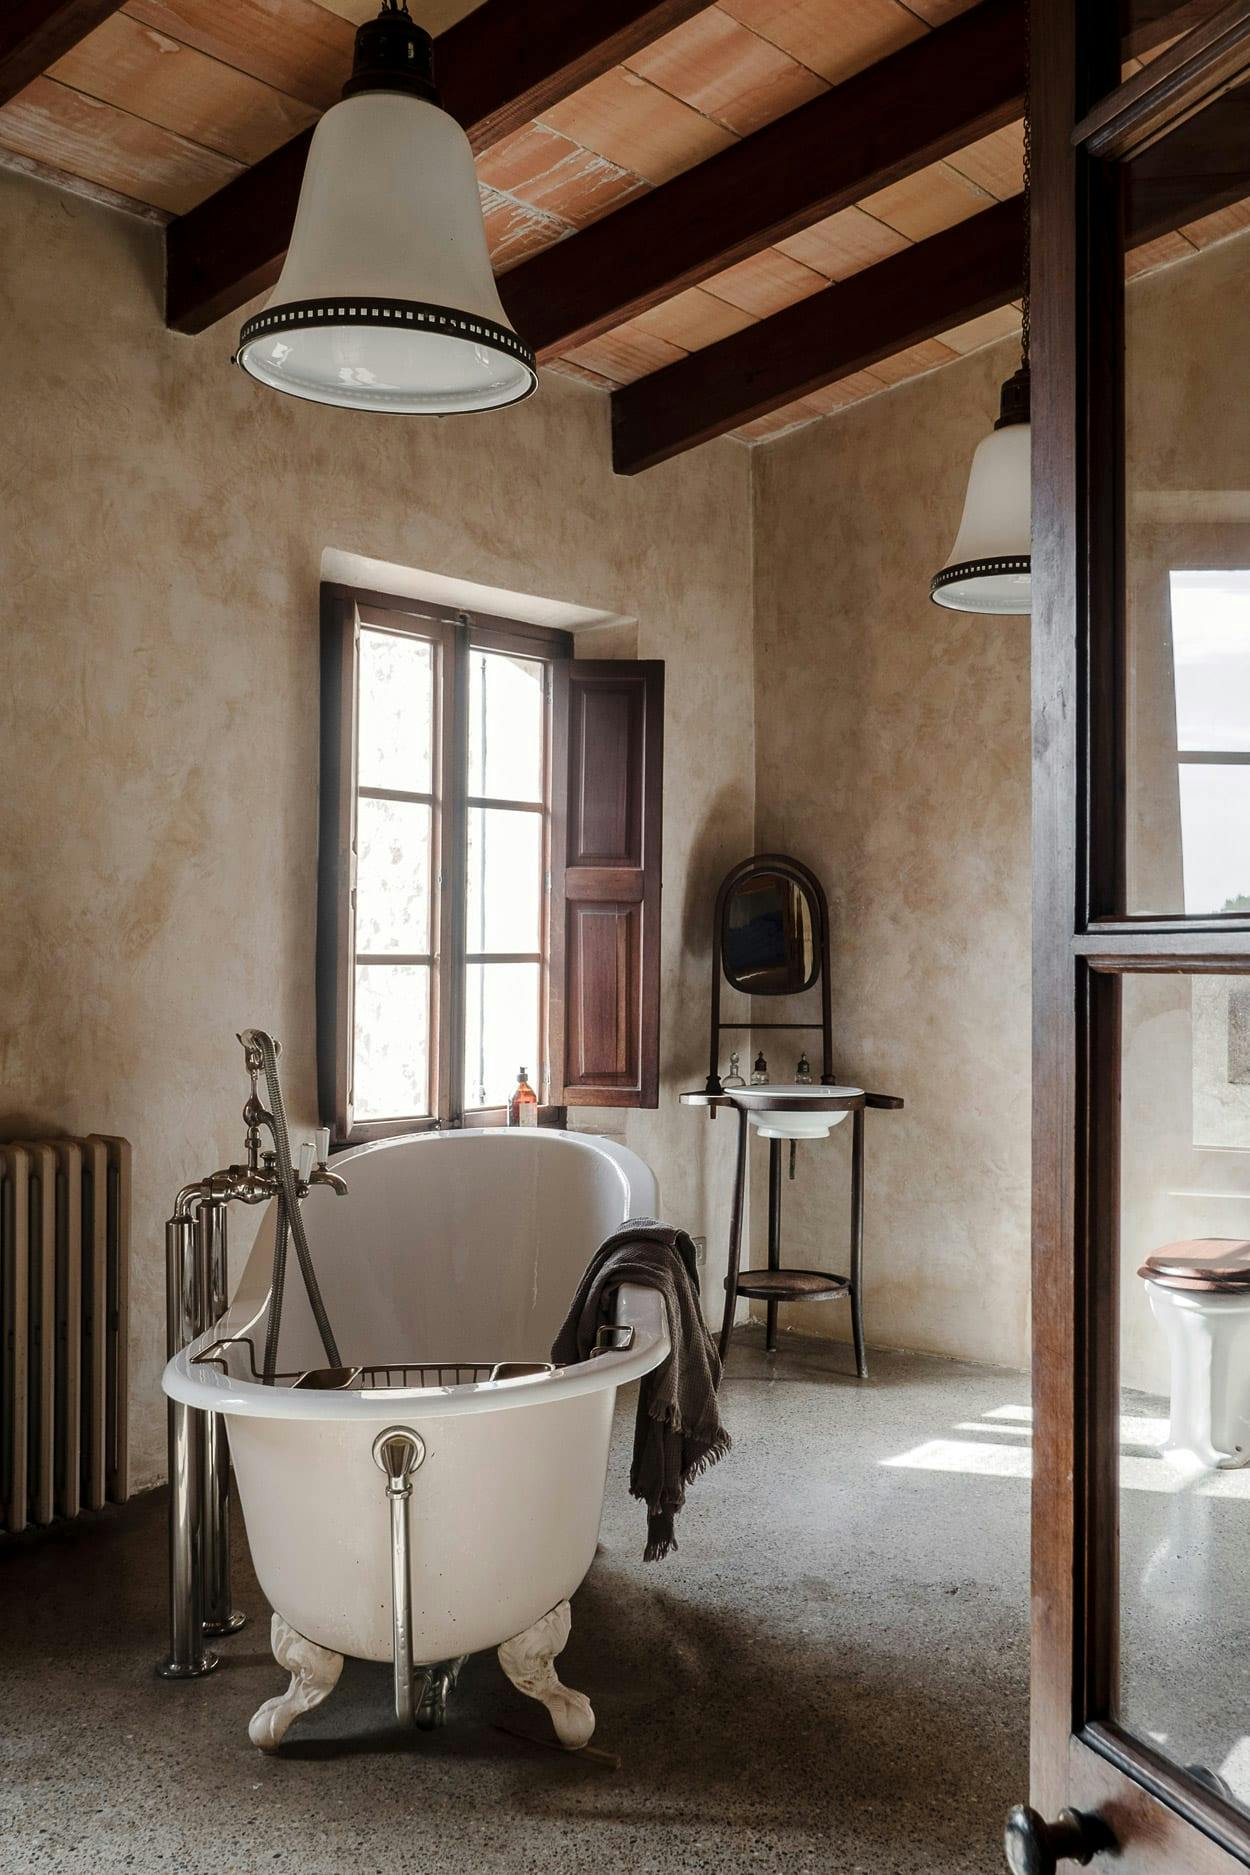 The image features a large, white claw-foot bathtub in a bathroom with a window, a sink, and a chair.